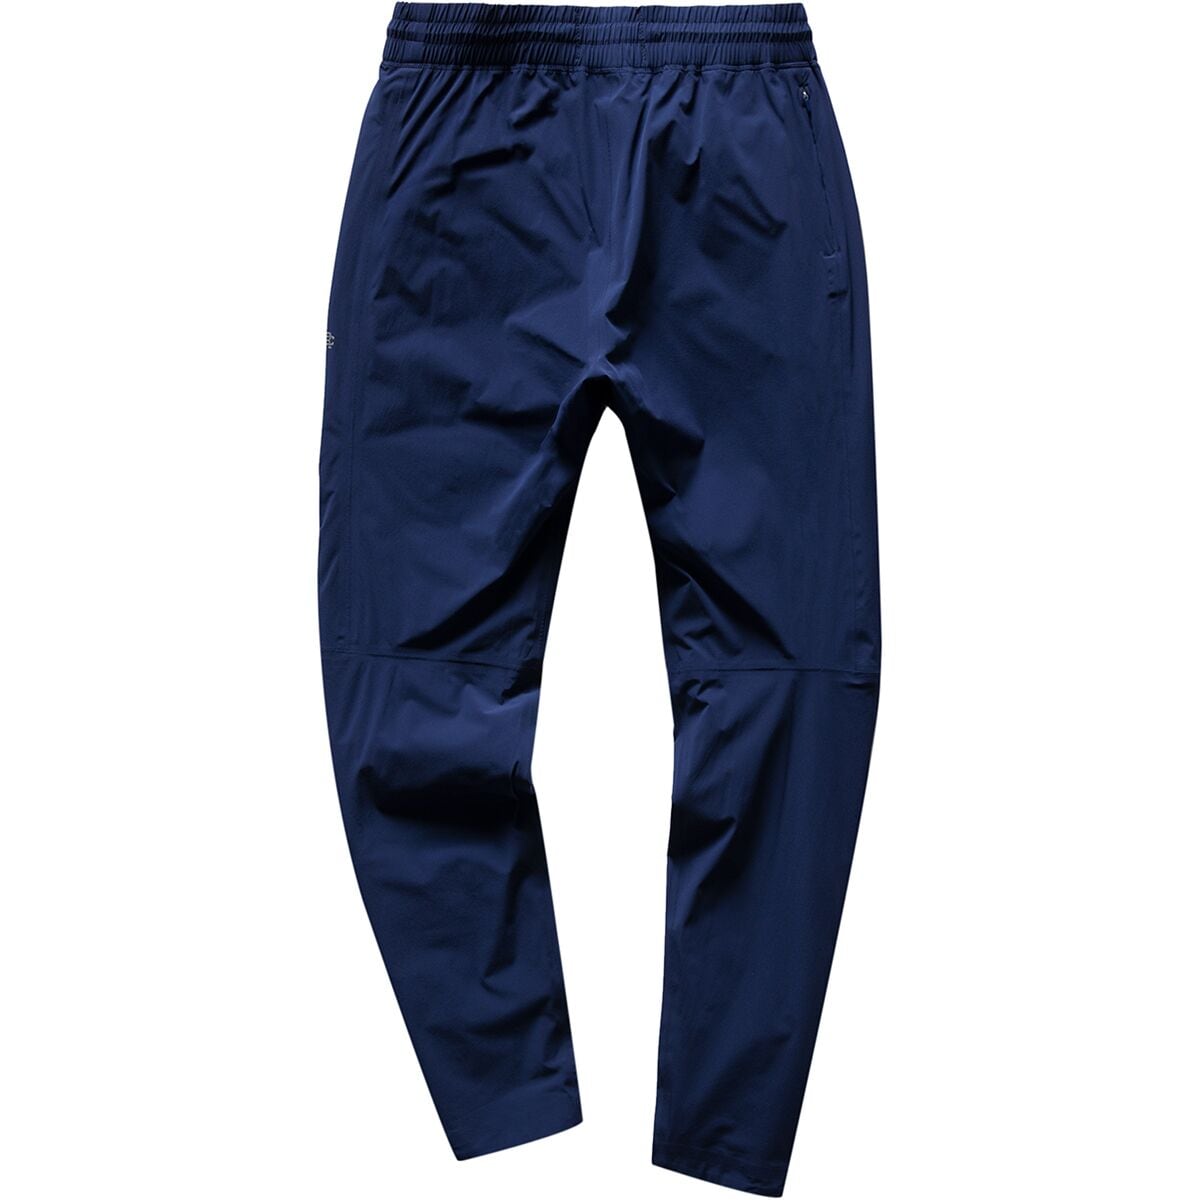 Reigning Champ Team Pant - Men's - Clothing